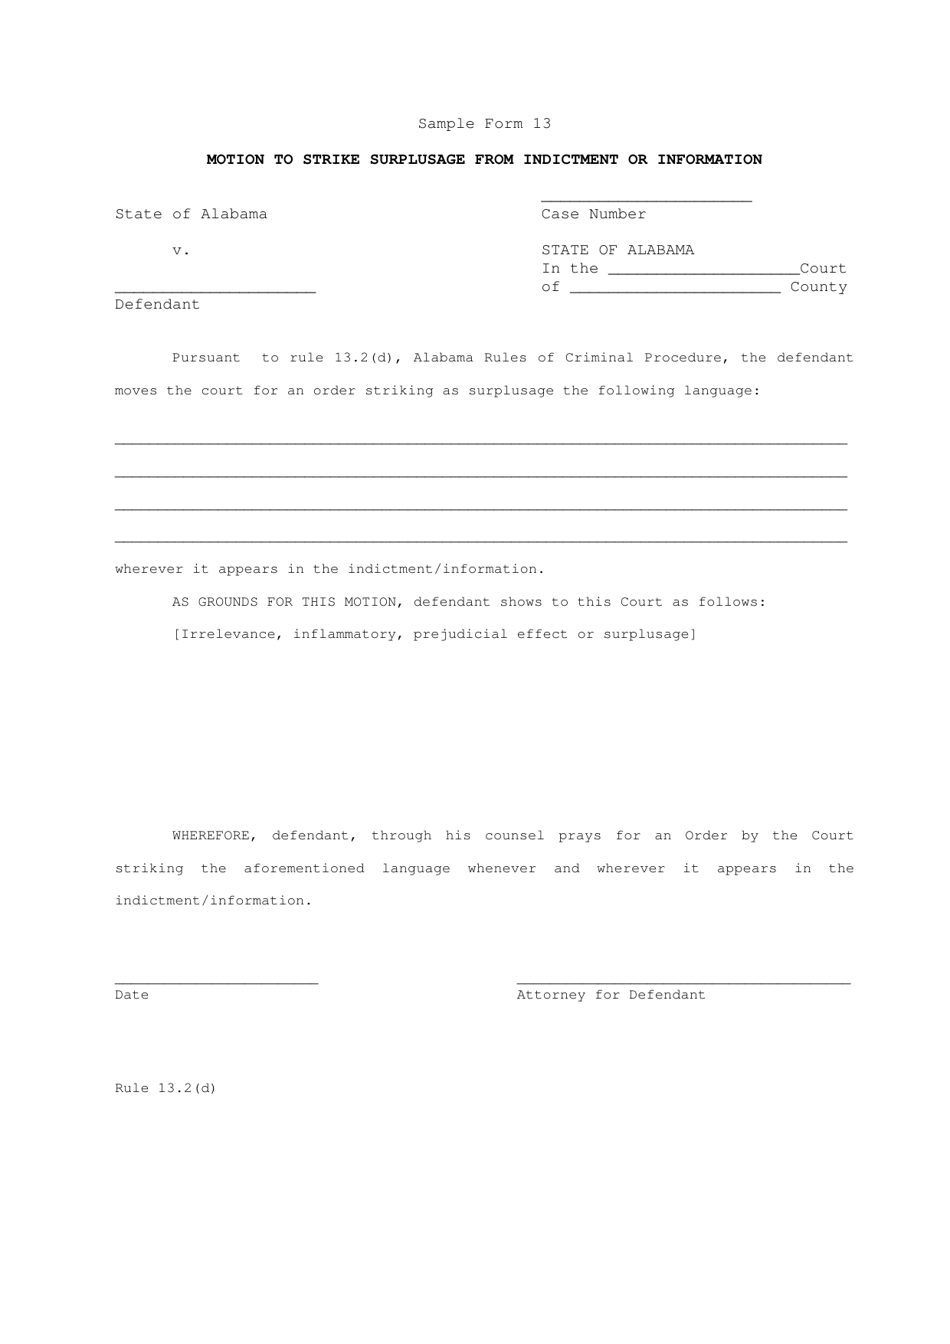 Sample Form 13 Motion to Strike Surplusage From Indictment or Information - Alabama, Page 1